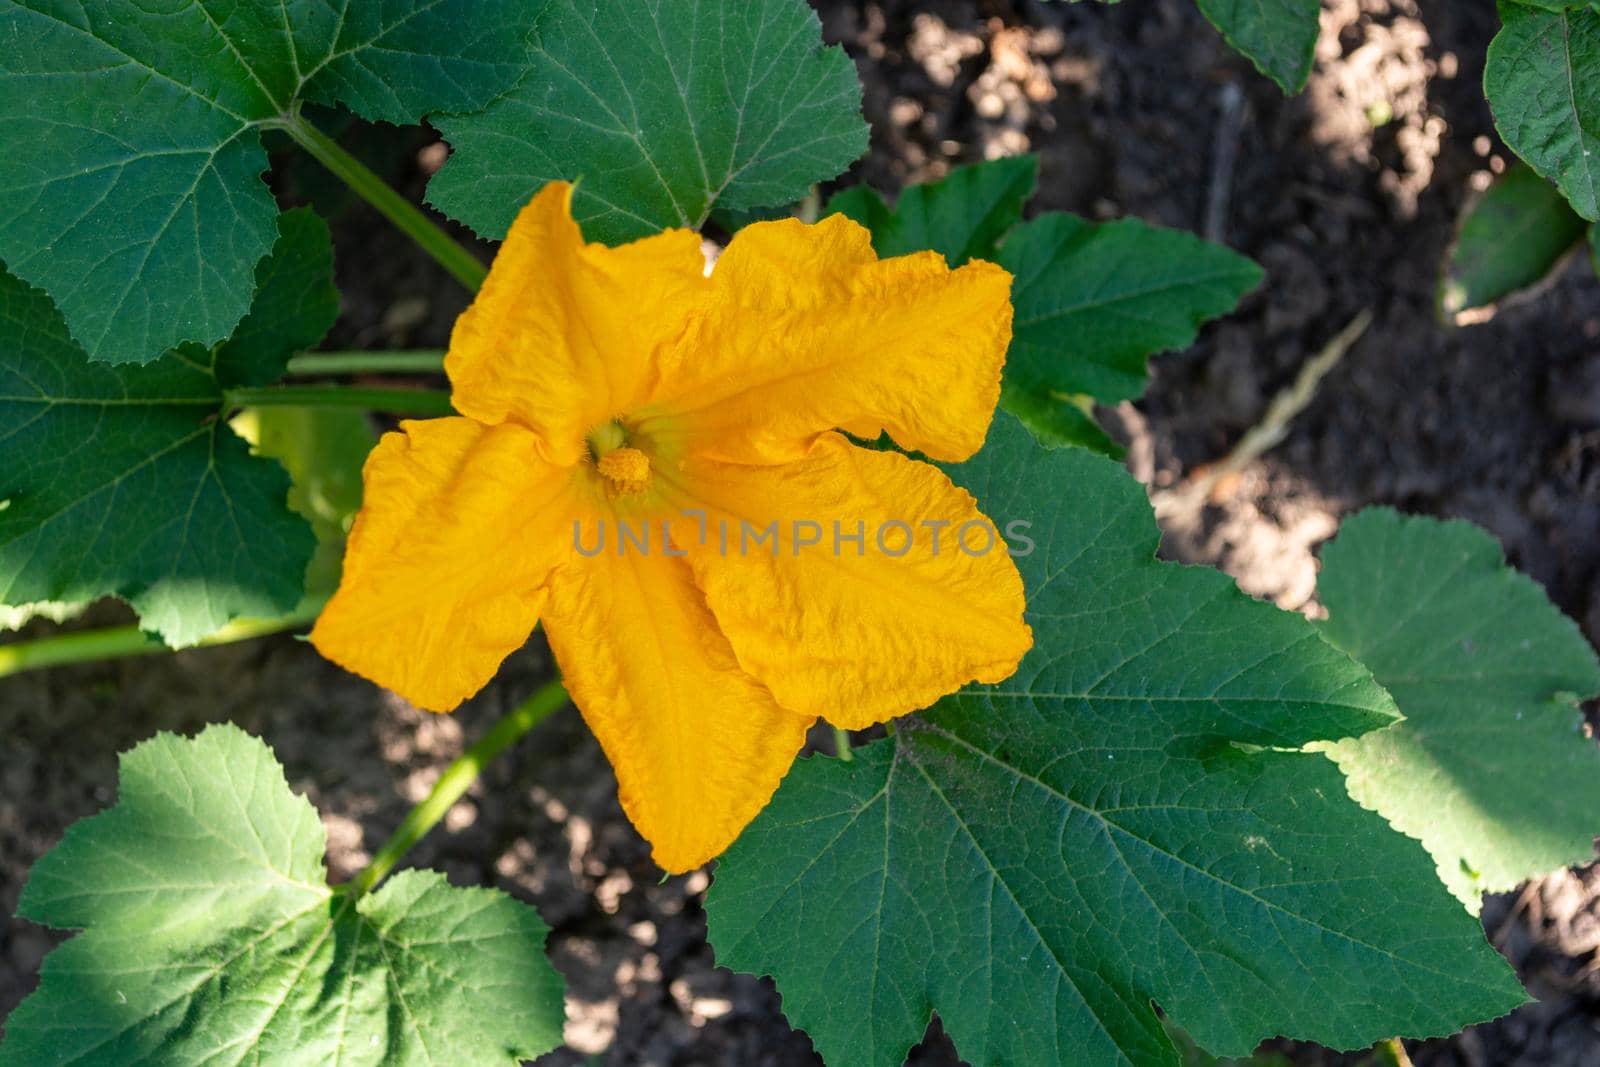 A large yellow zucchini flower in the garden close-up.